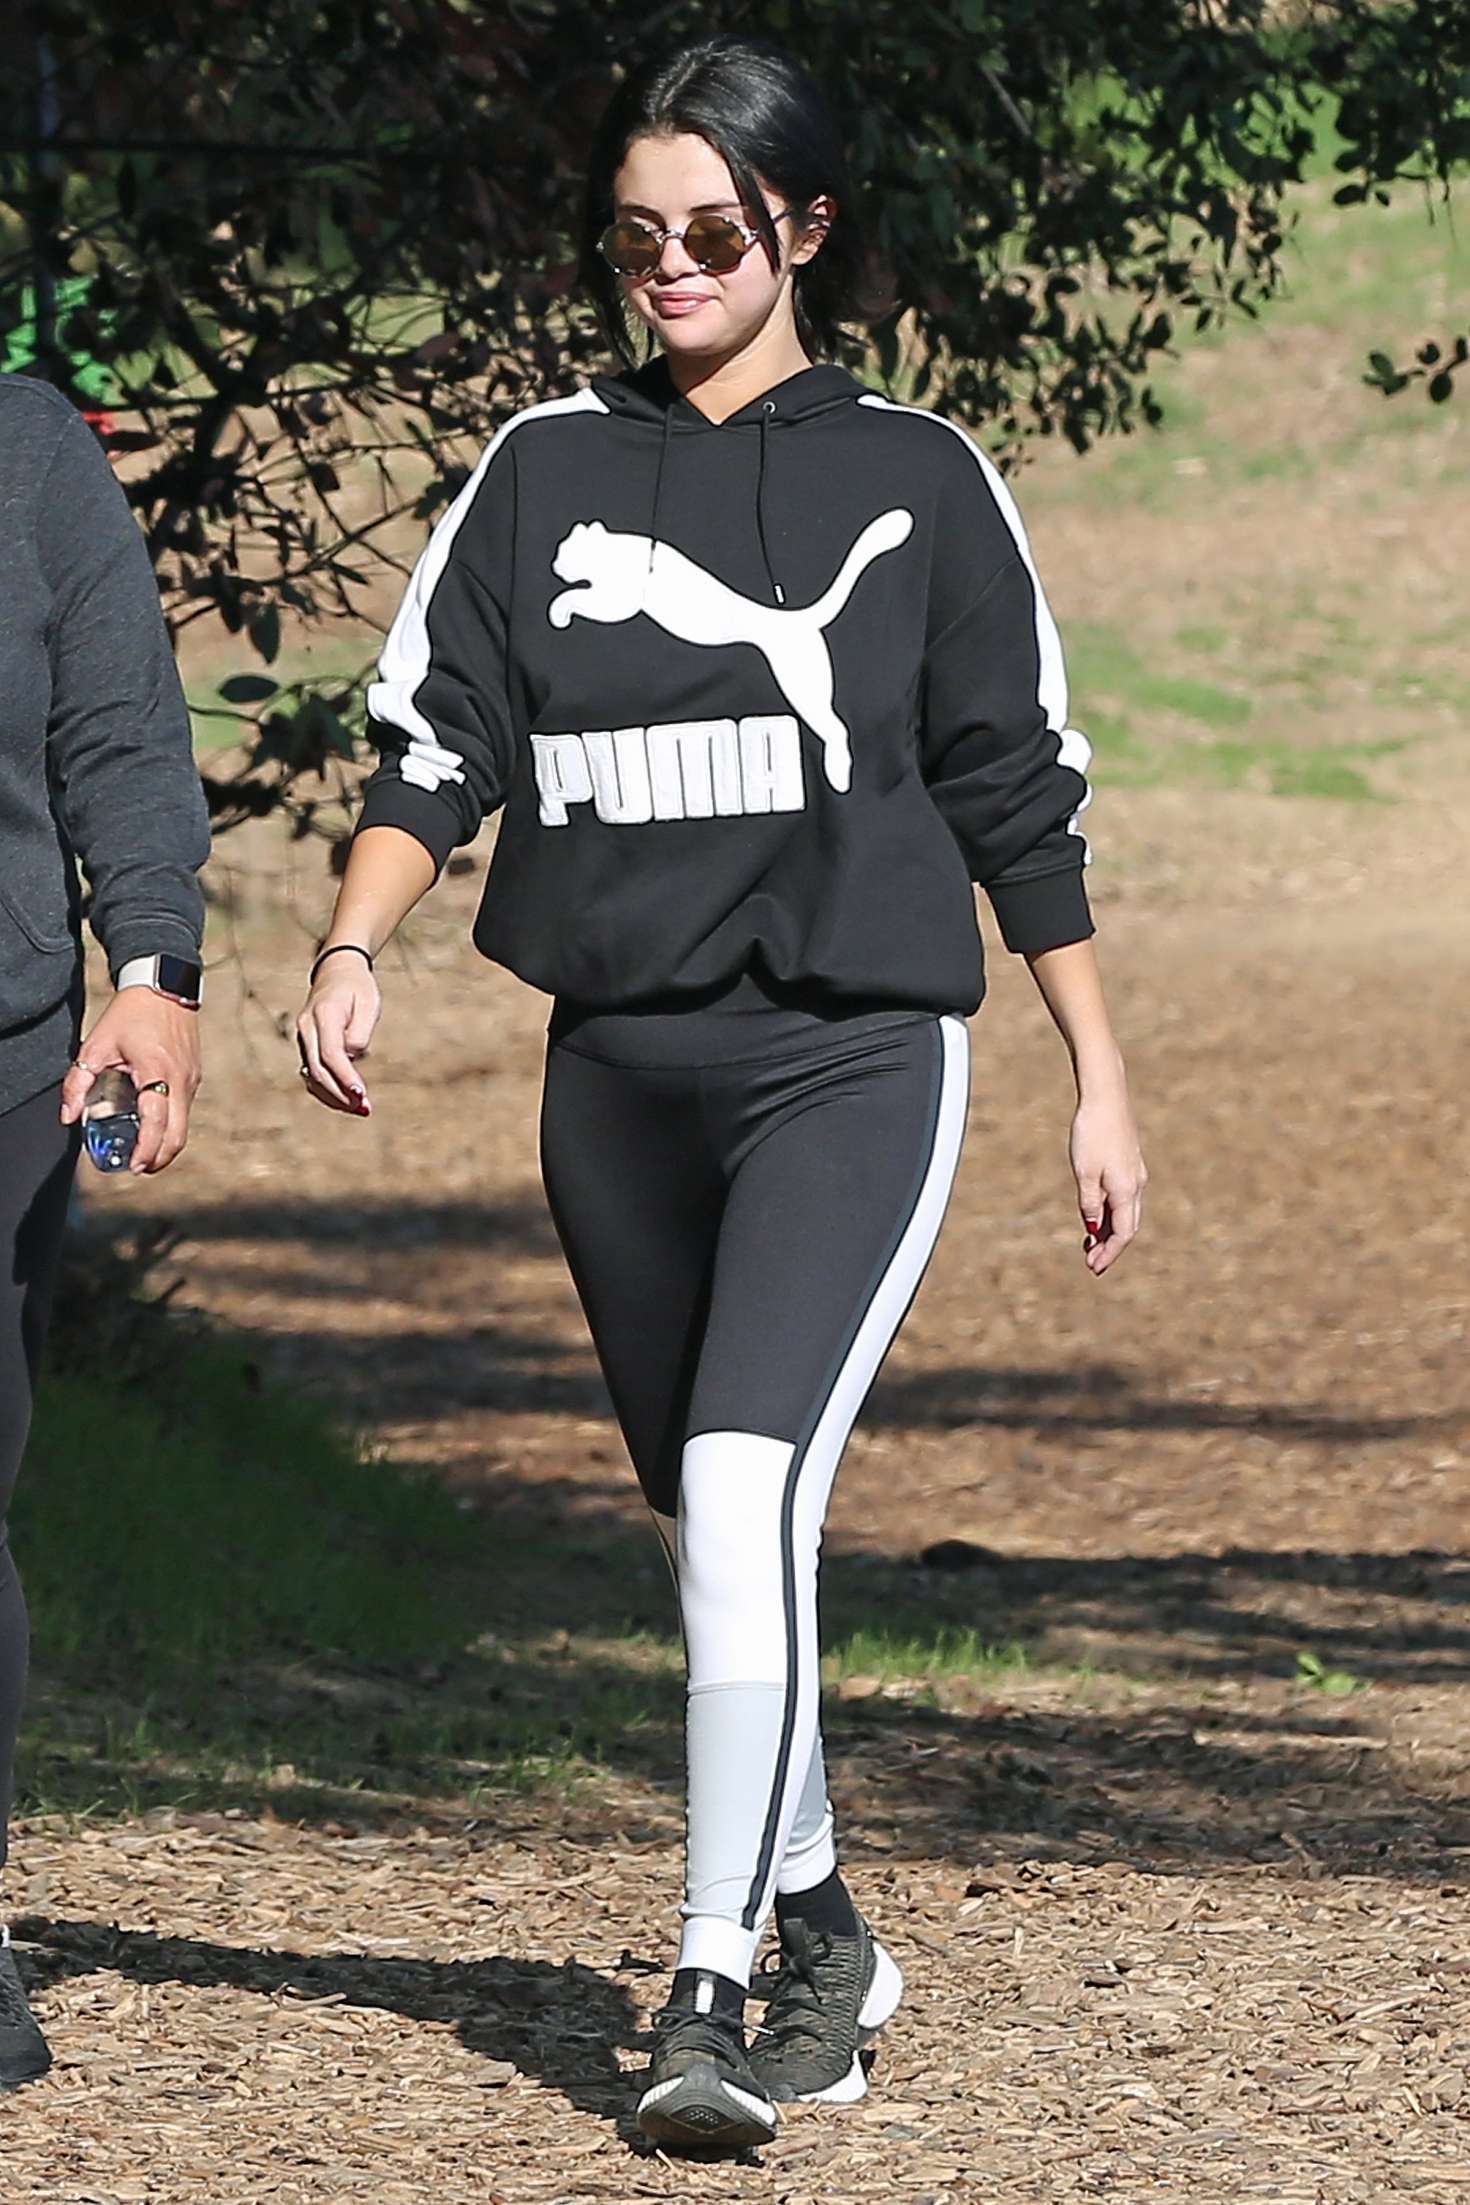 Selena Gomez â€“ Out for a hike in Los Angeles